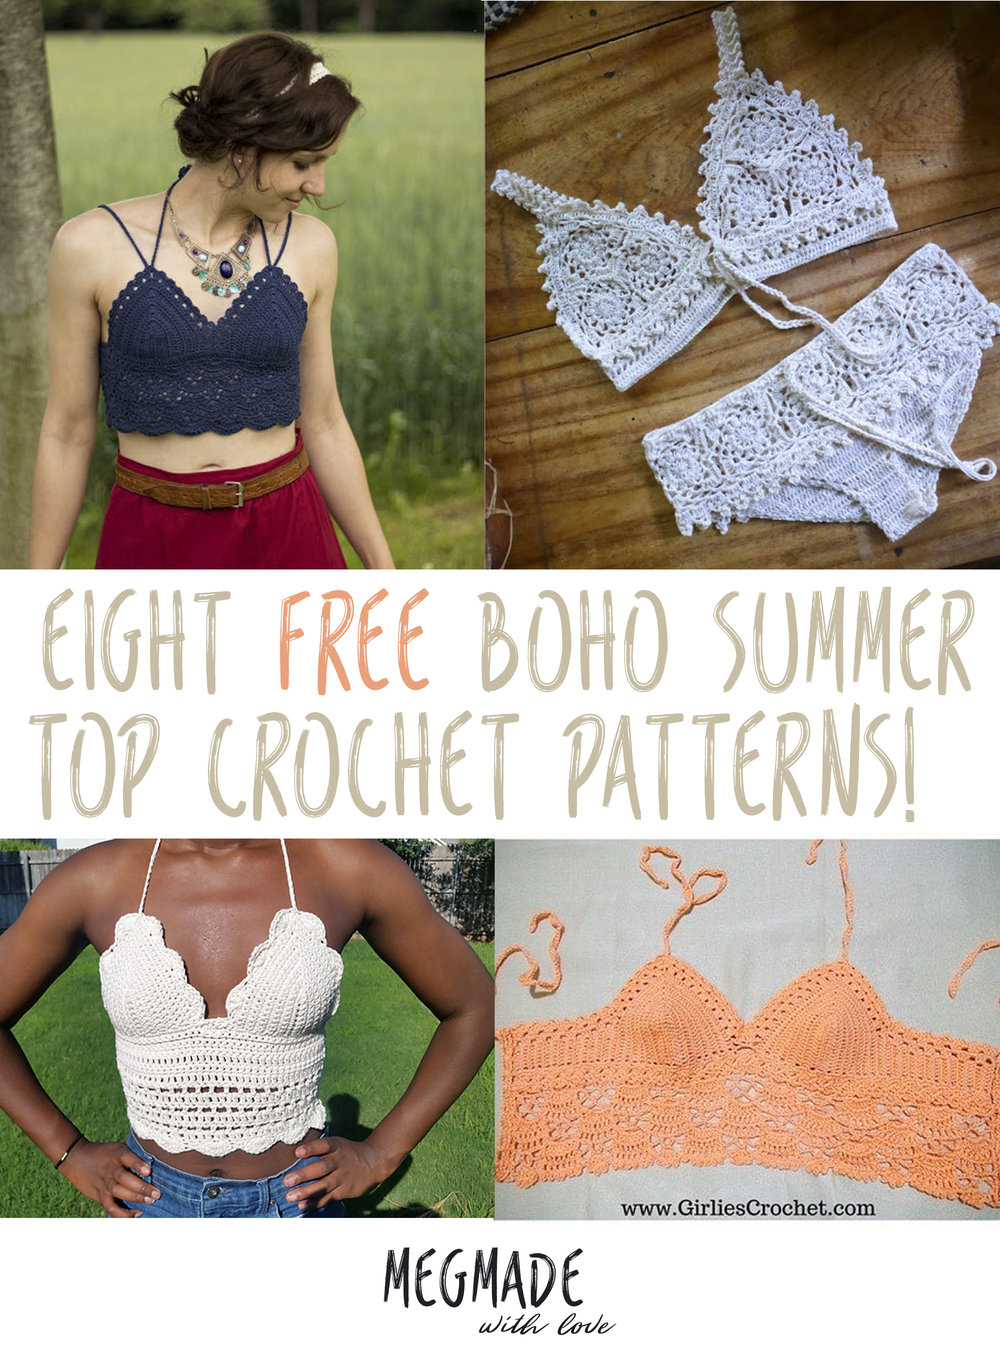 9 Free Boho Summer Top Crochet Patterns — Megmade with Love